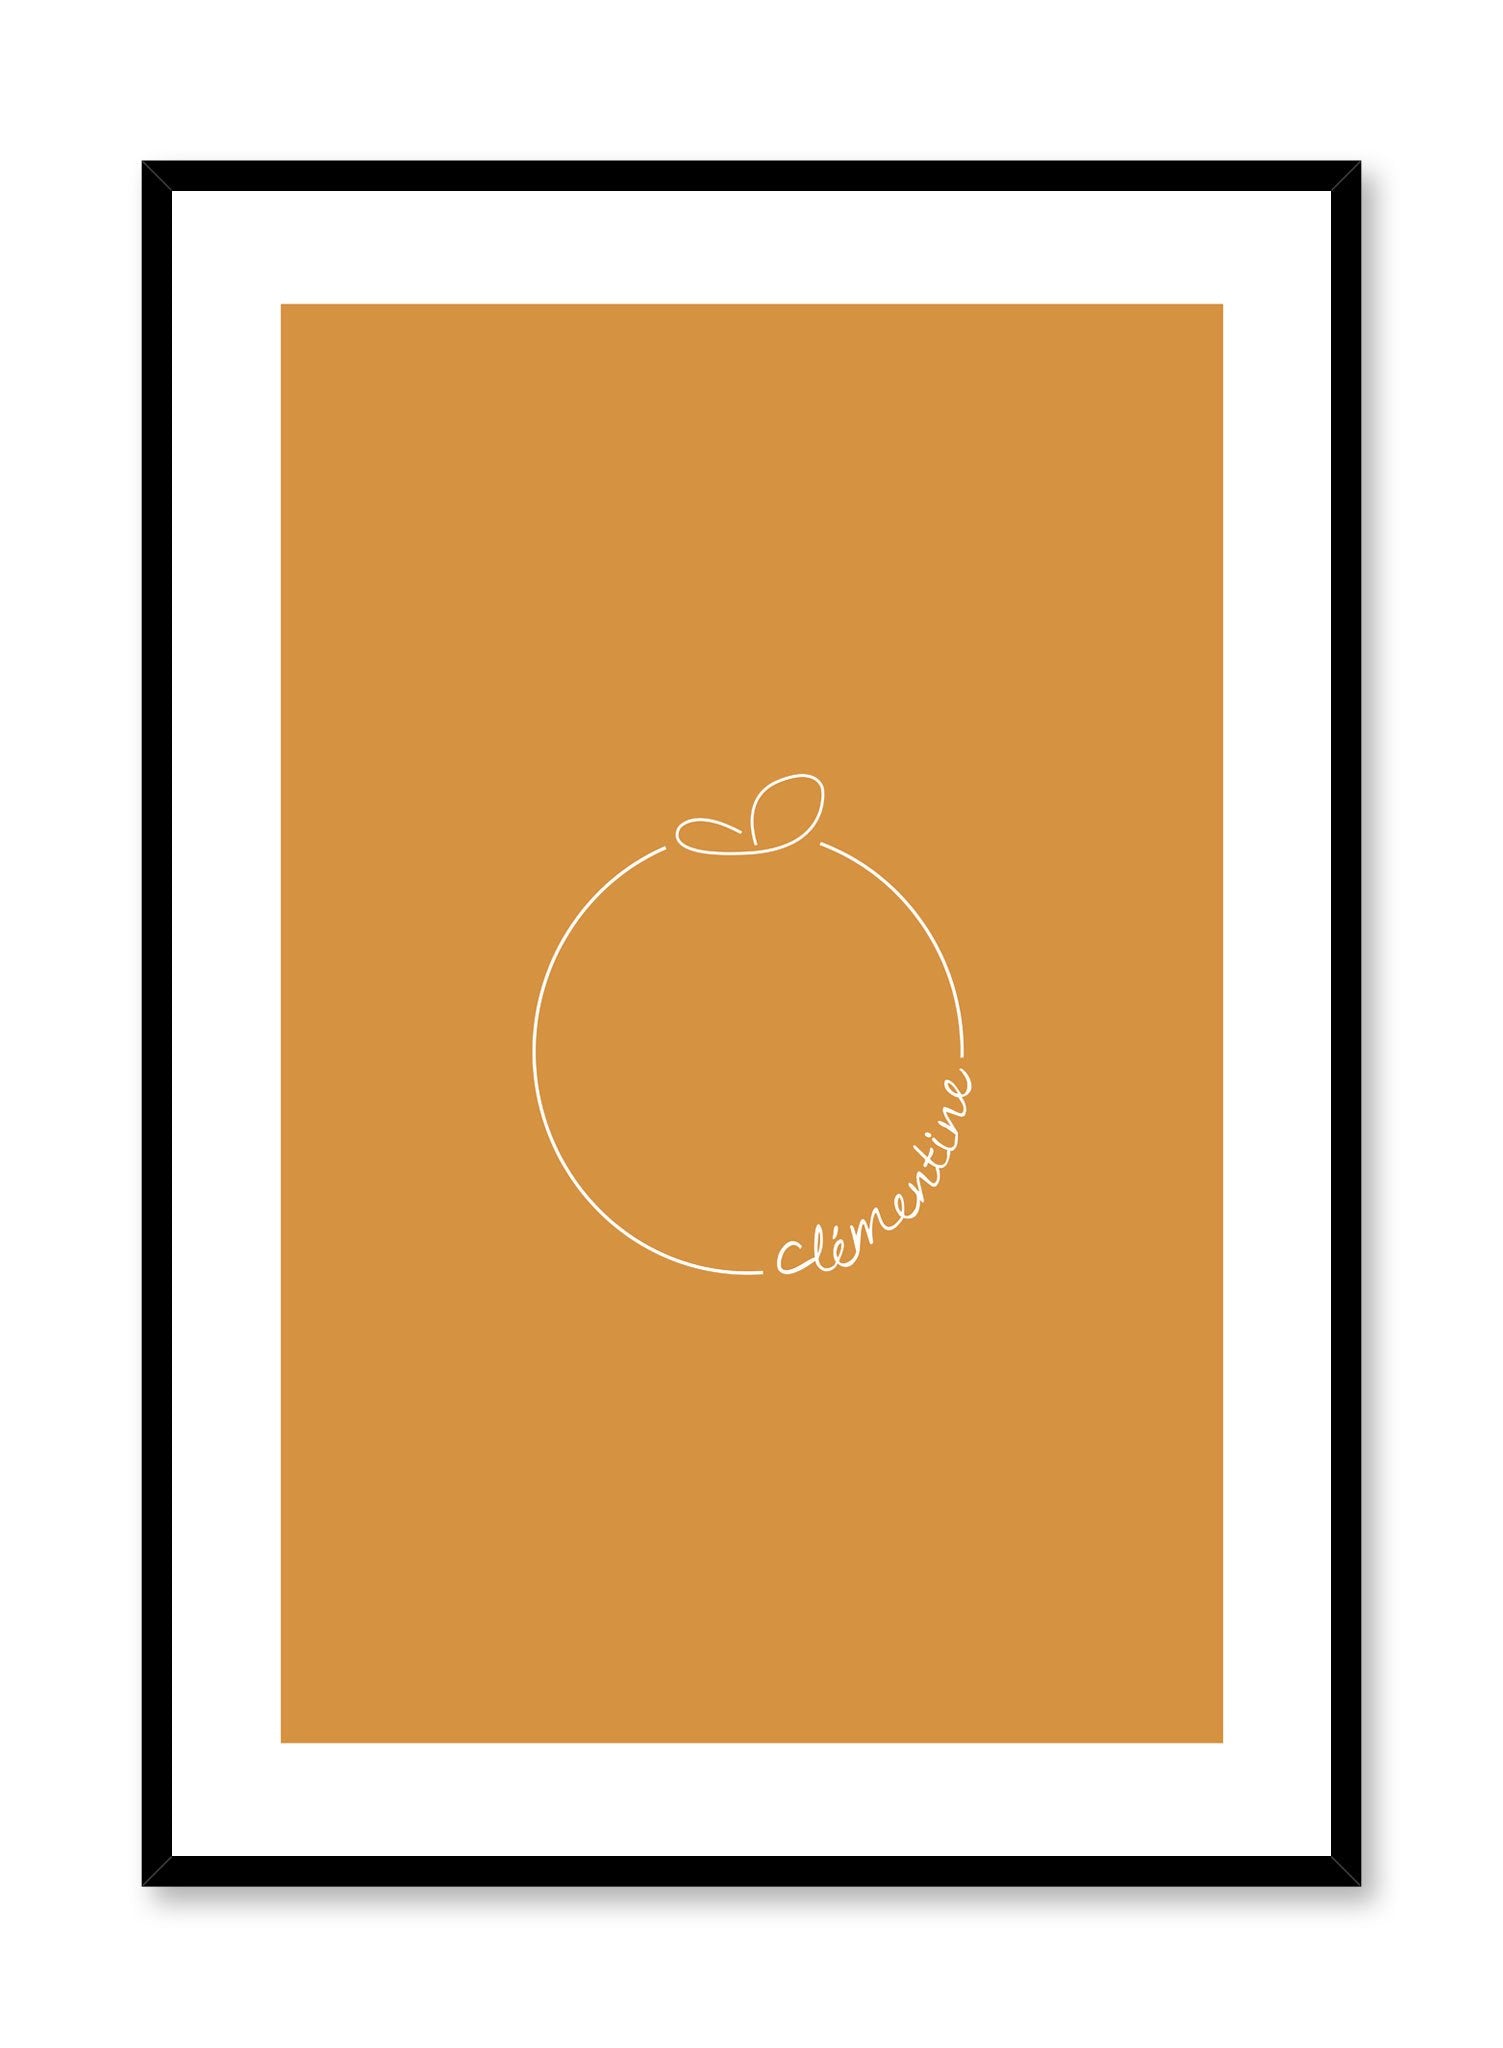 Minimalist poster by Opposite Wall with Clementine orange illustration